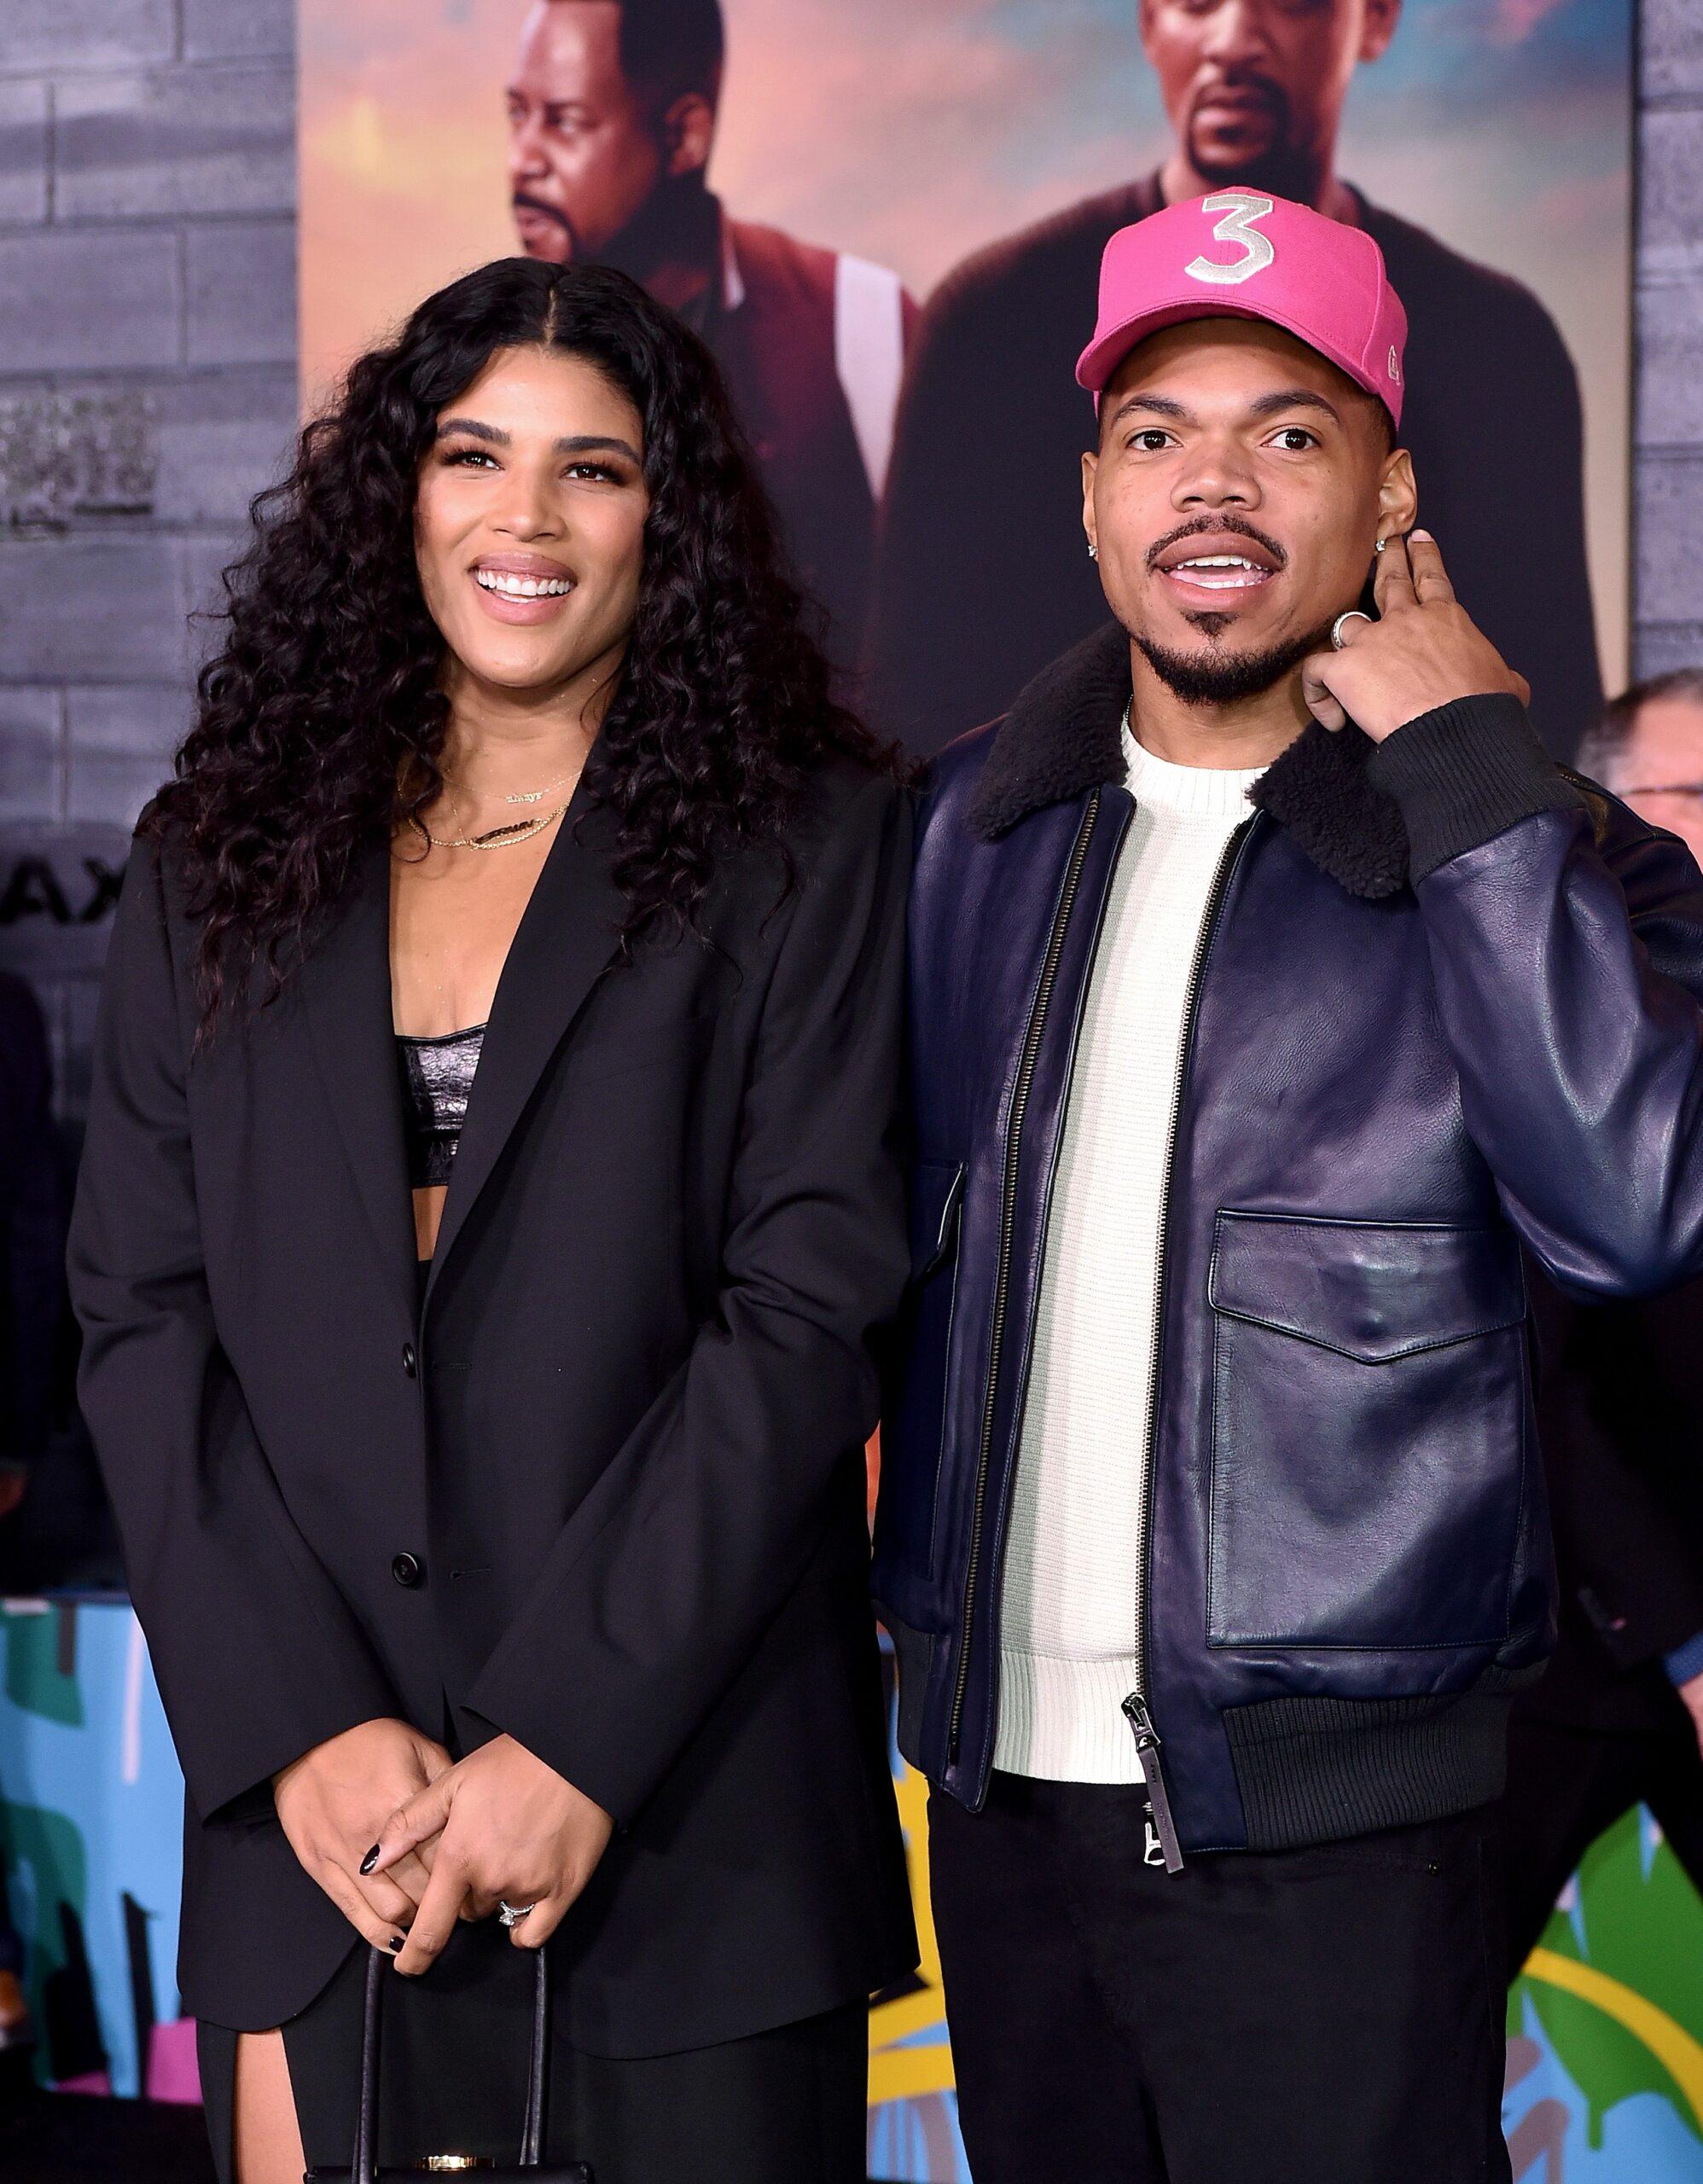 Chance the Rapper at the "Bad Boys for Life" Premiere